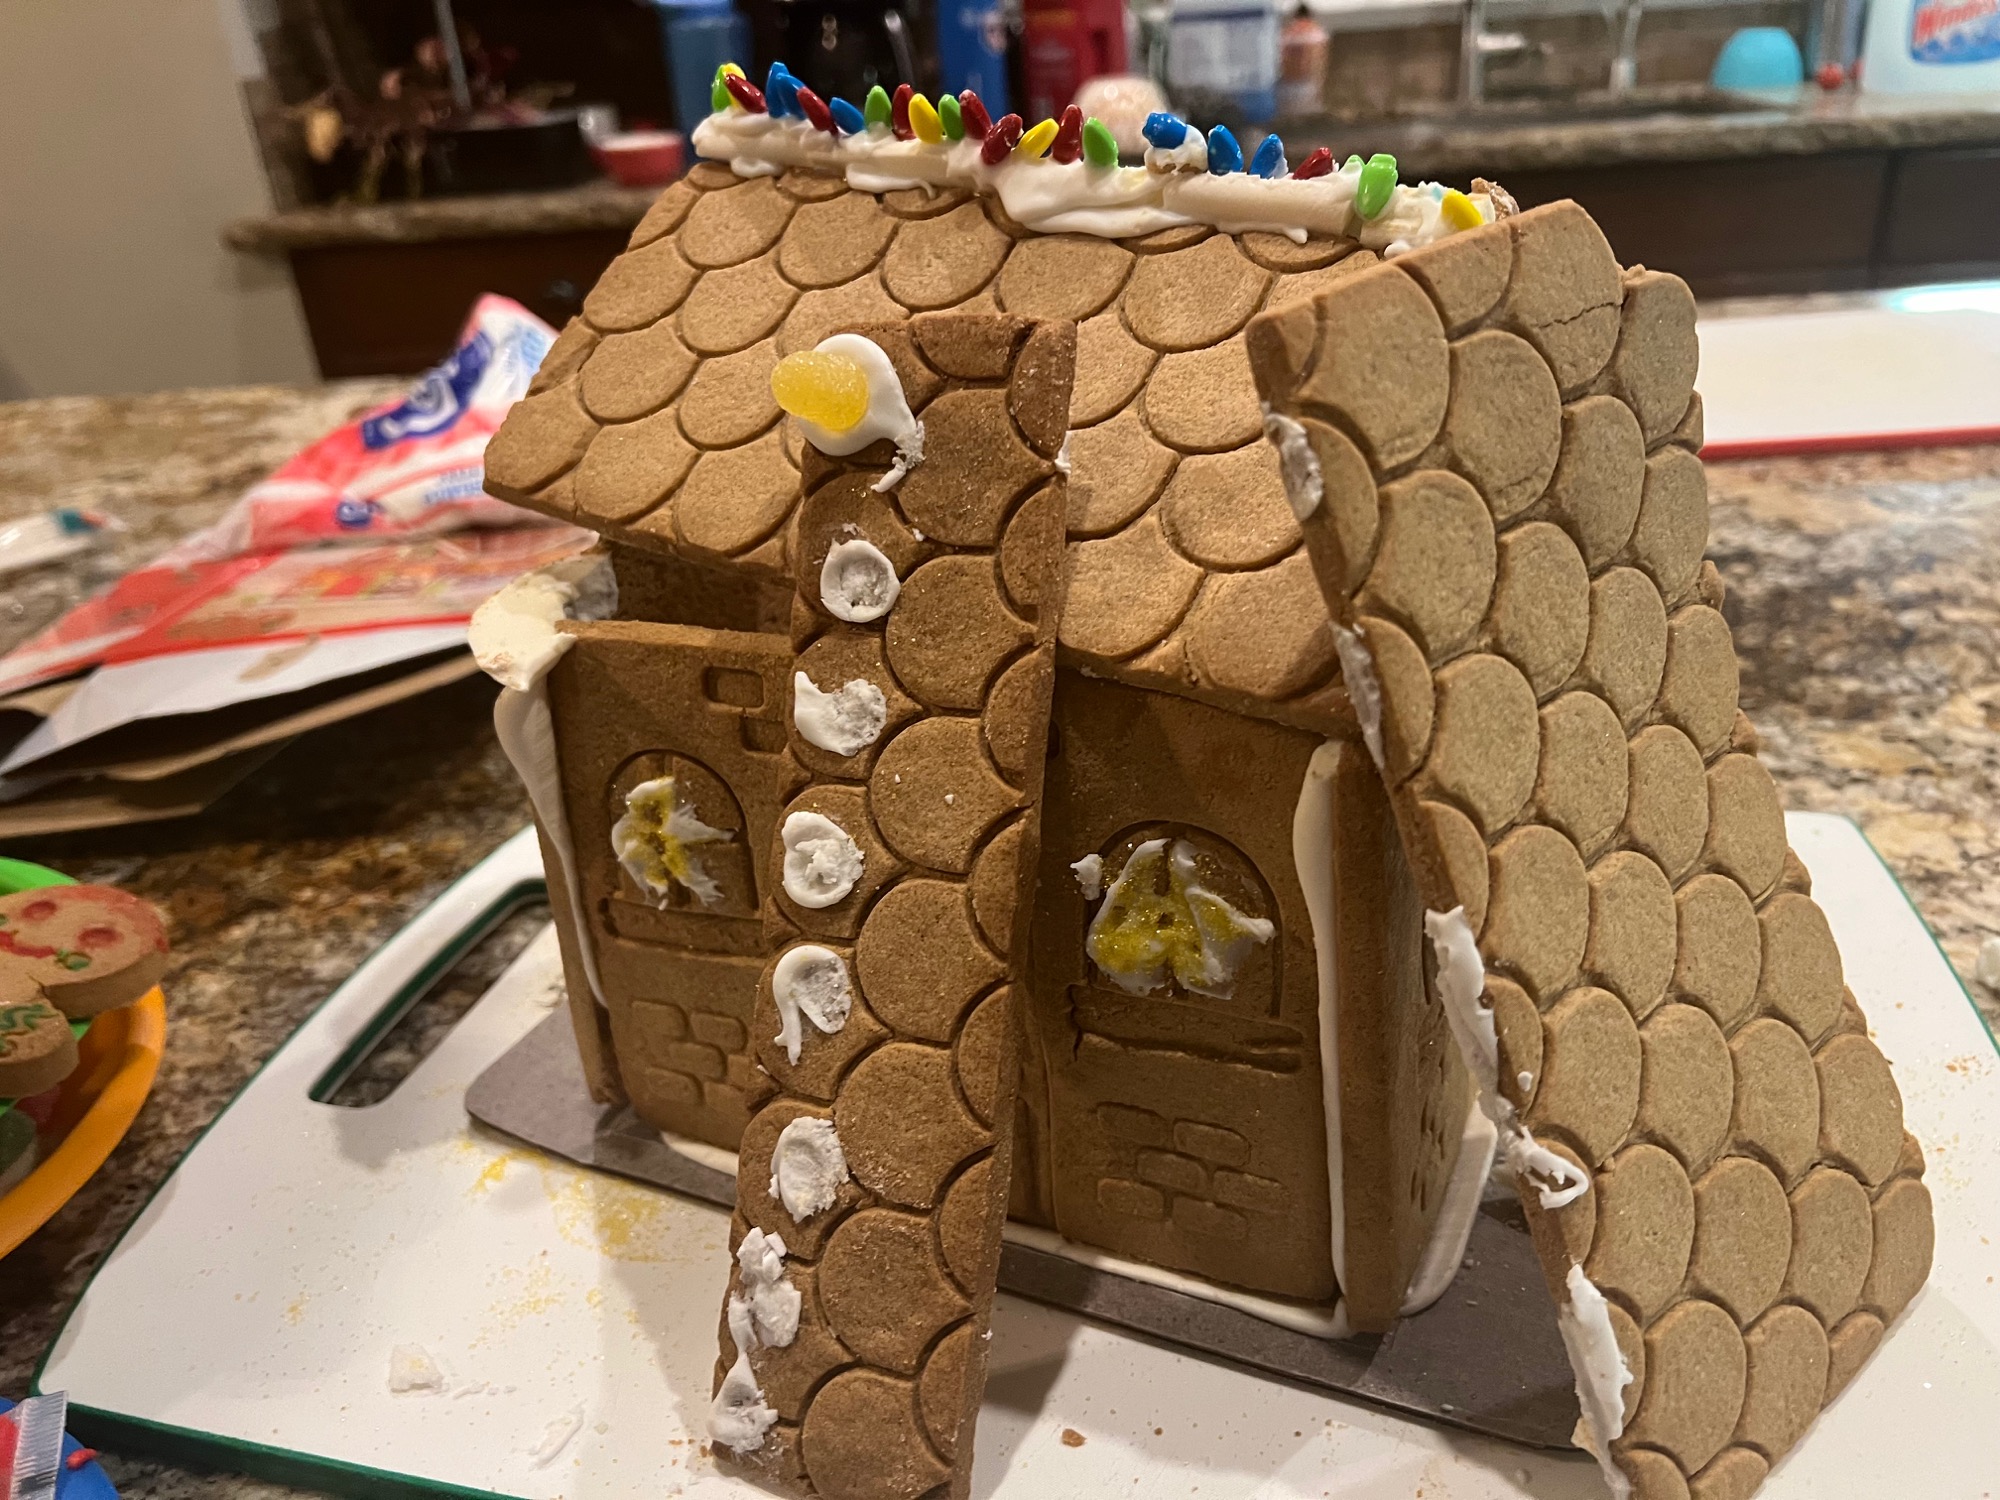 Liam's gingerbread house